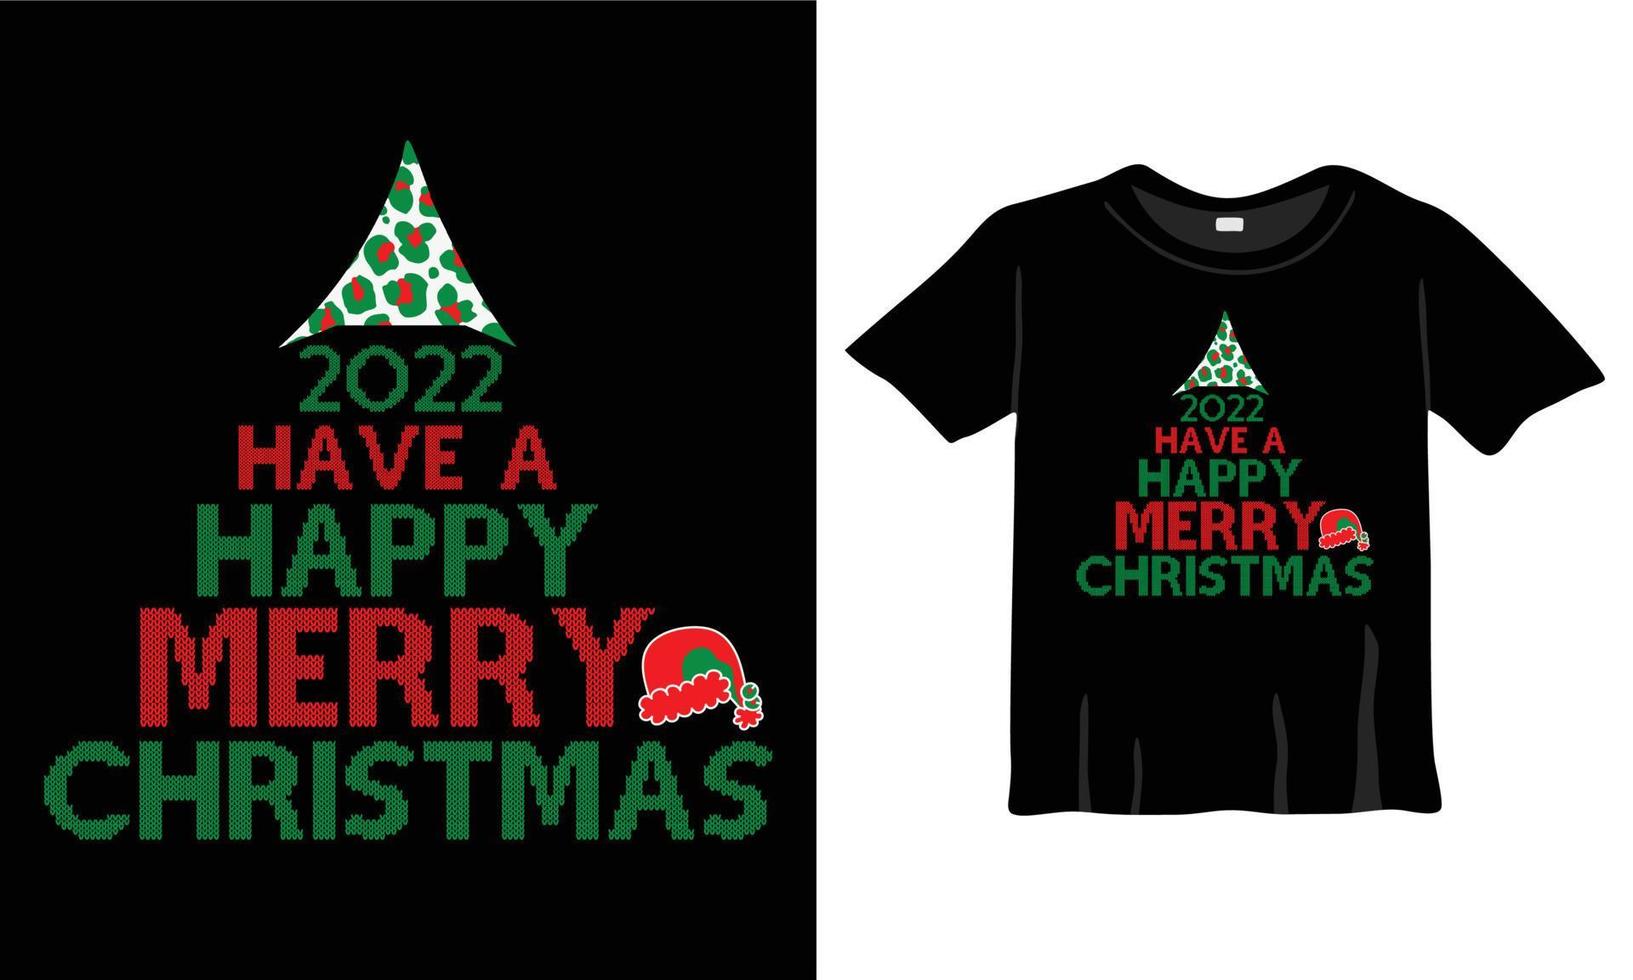 Have a happy merry Christmas T-Shirt Design Template for Christmas Celebration. Good for Greeting cards, t-shirts, mugs, and gifts. For Men, Women, and Baby clothing vector